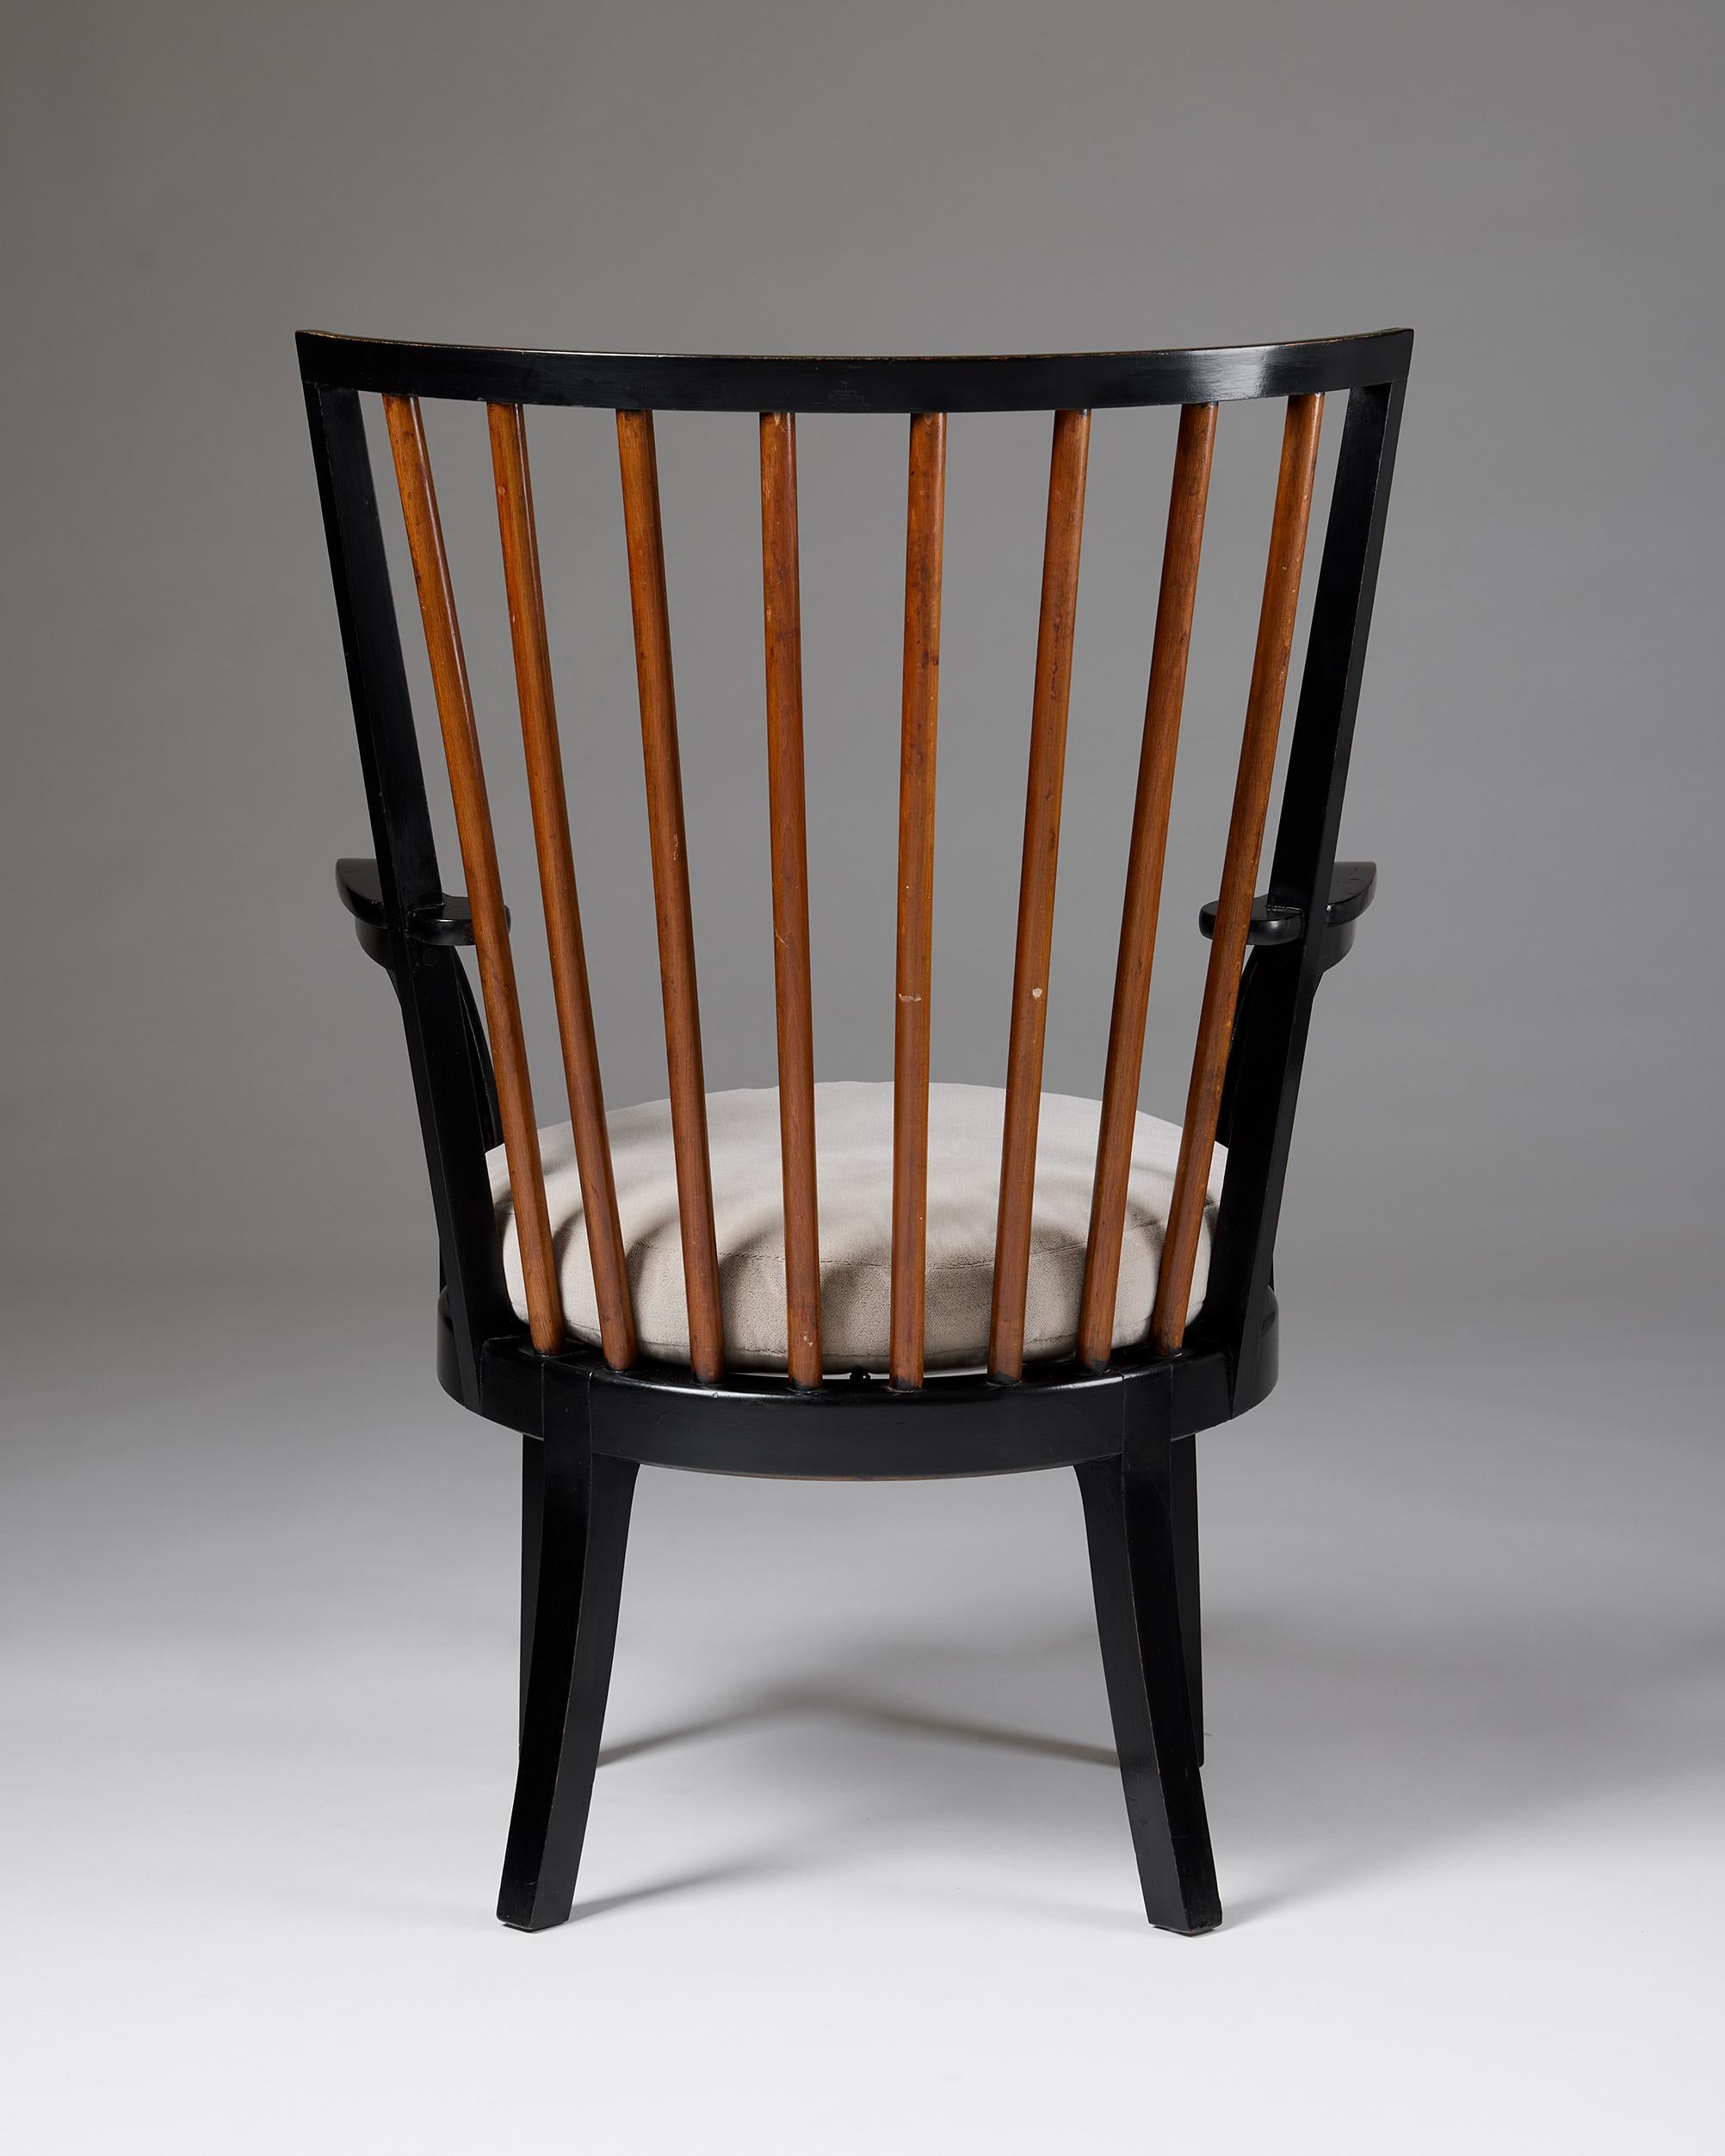 Swedish Armchair ‘Bridge’ Designed by Axel Einar Hjorth for Nk, Sweden, 1930s For Sale